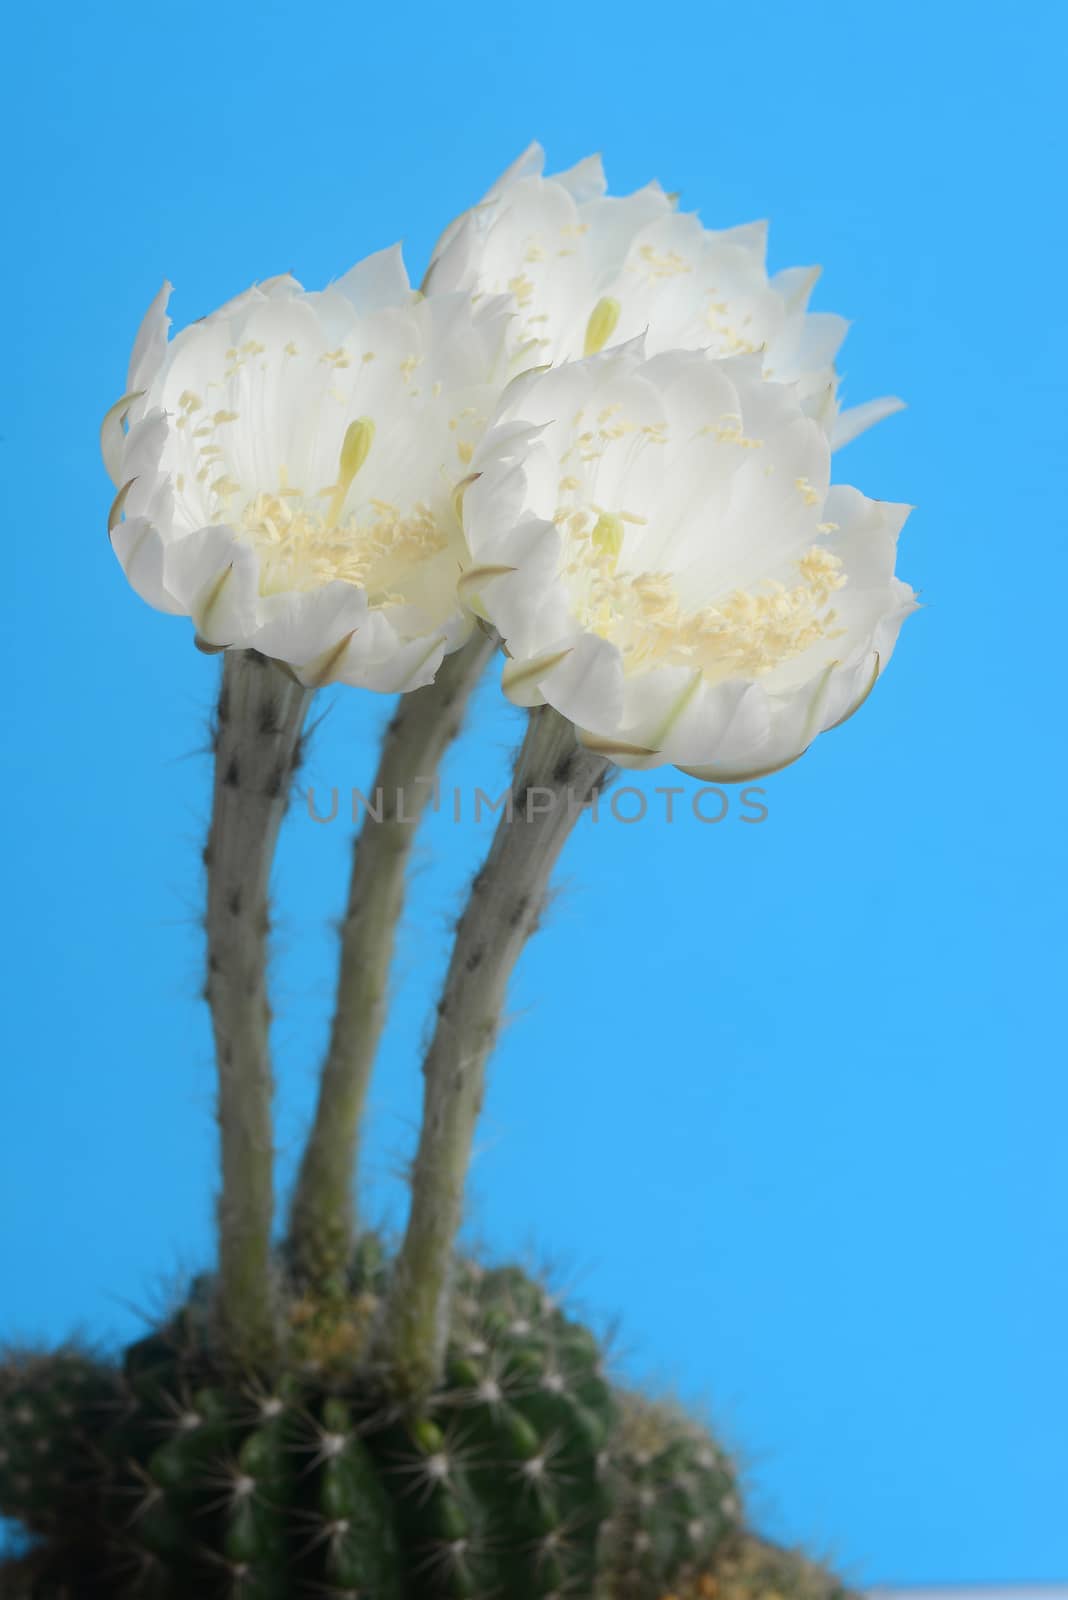 Blooming White Echinopsis calochlora cactus flower on blue background